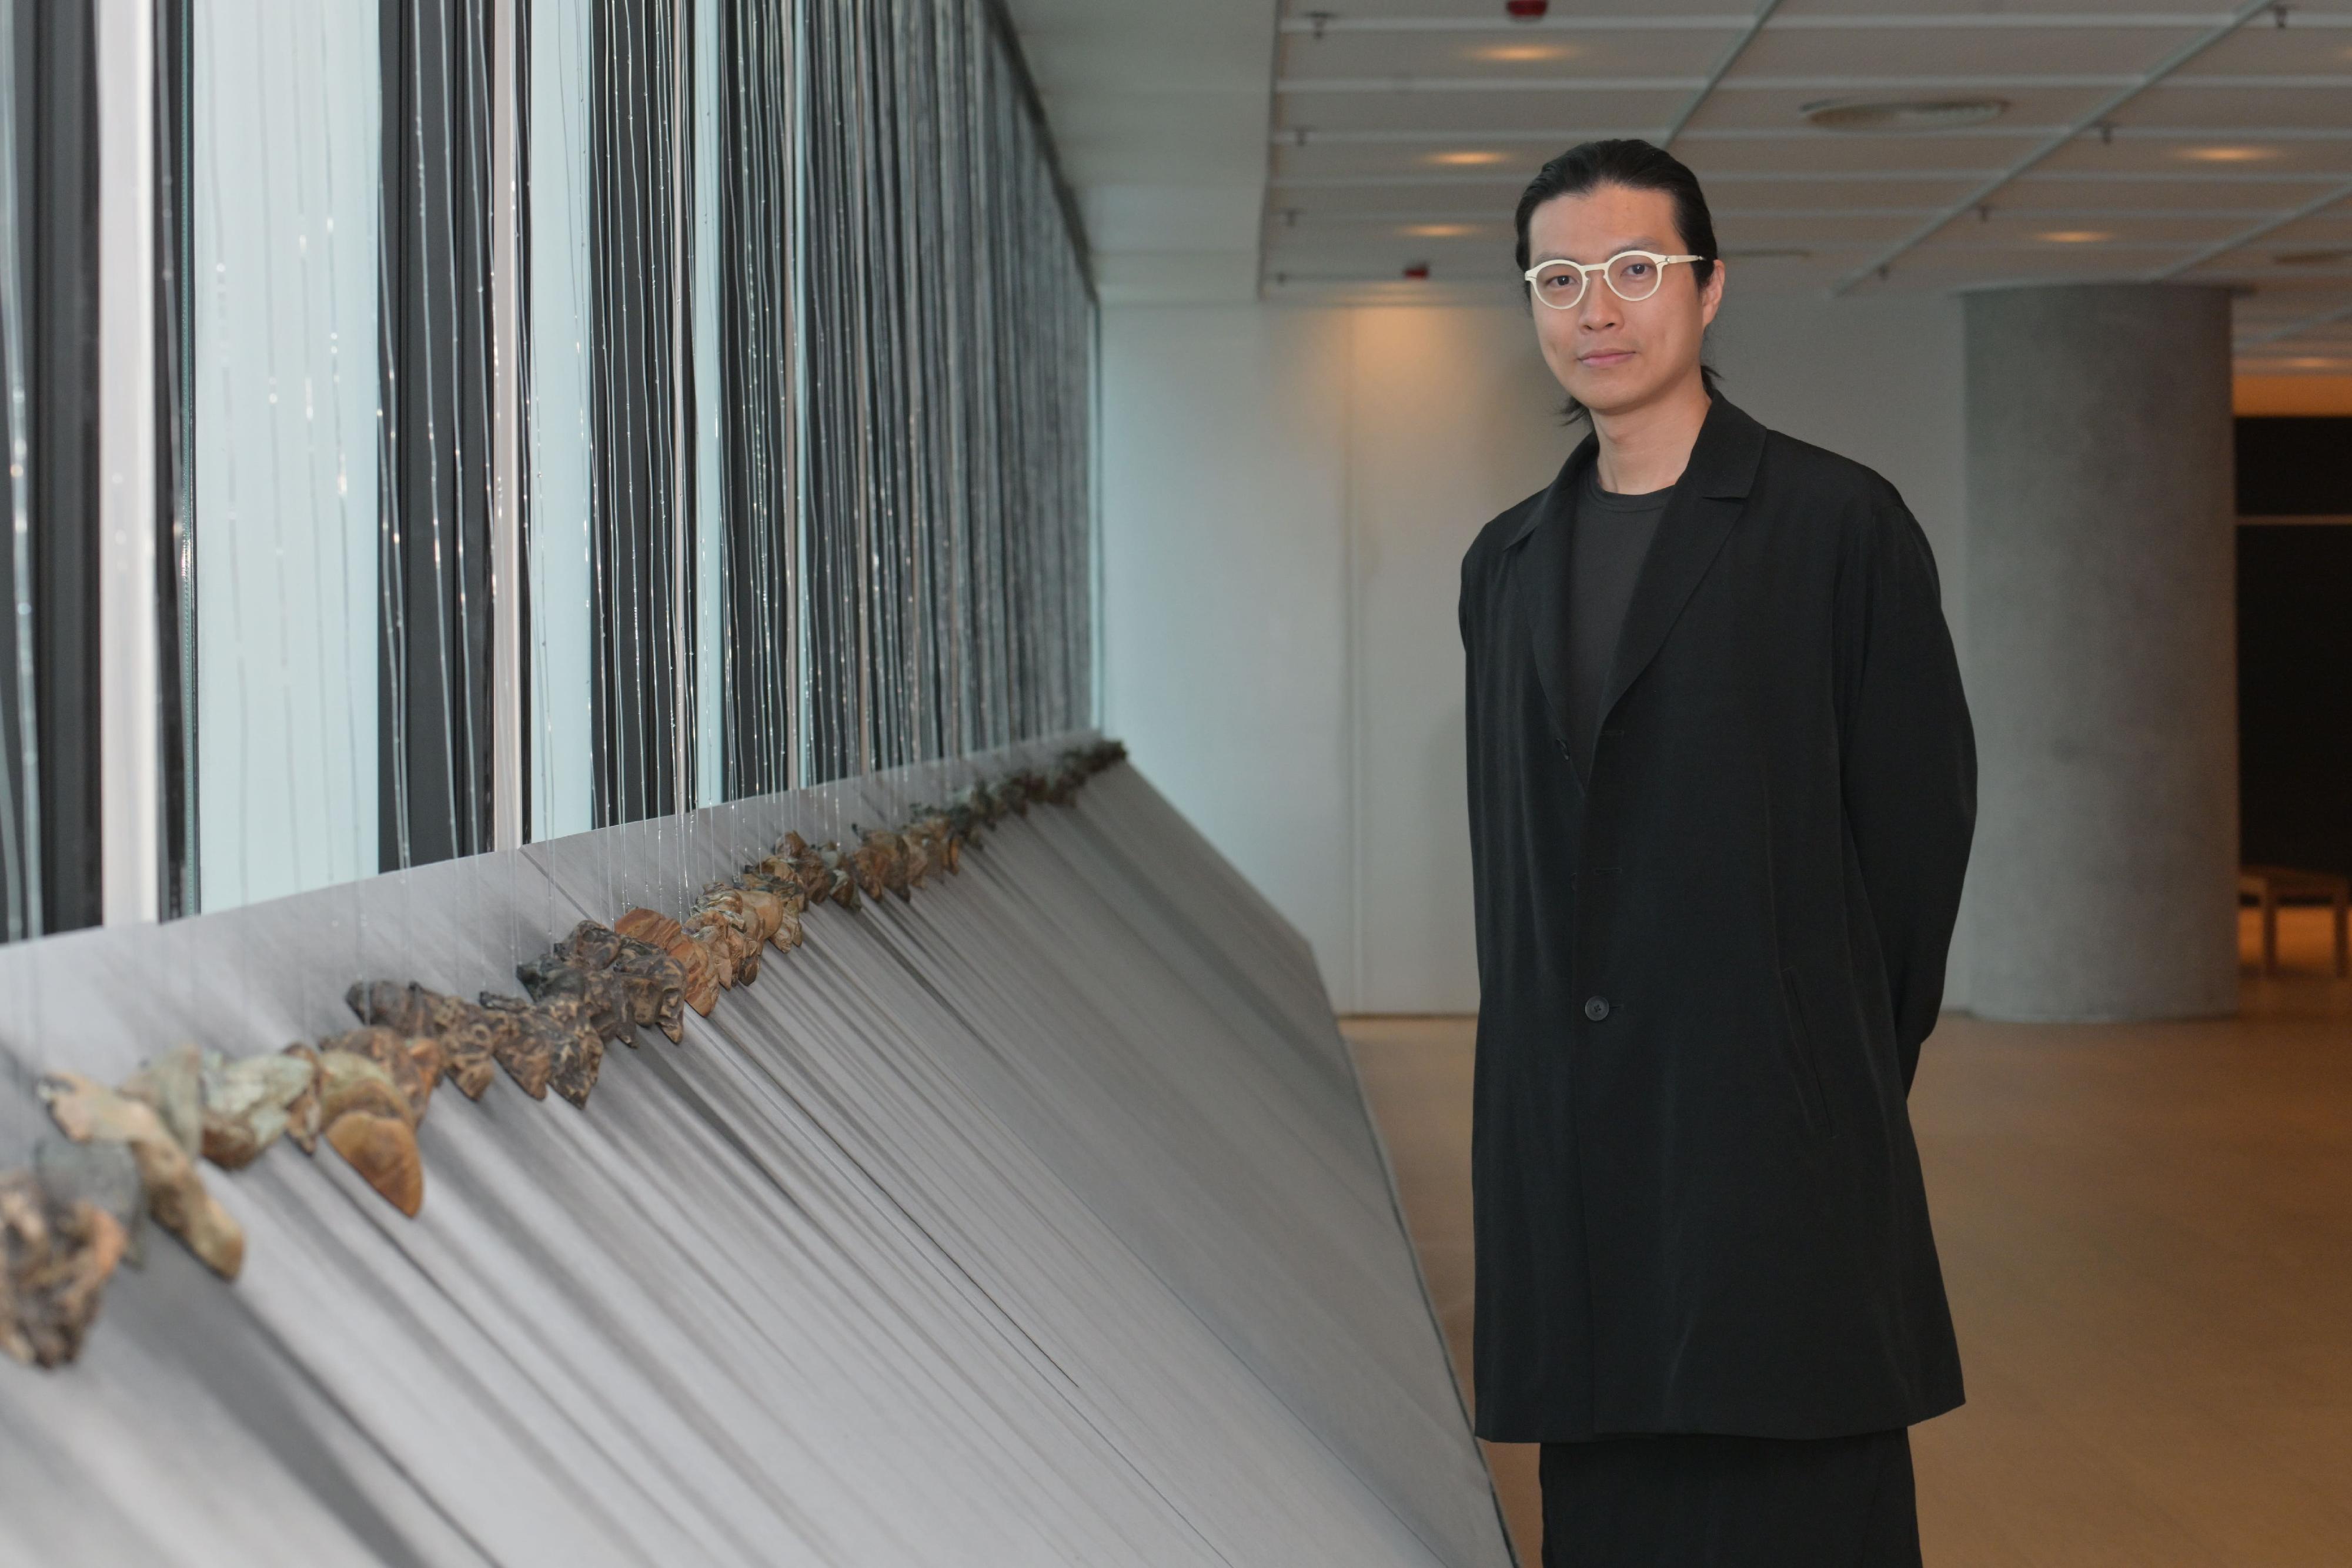 The Wu Guanzhong Art Sponsorship: Cross-disciplinary Series opened today (March 21) at the Hong Kong Museum of Art. Picture shows Hong Kong artist Chris Cheung and his site-specific art installation, "Falling Tears". Driven by rainfall data, the intricately programmed mechanical device pumps water upwards and lets it drip onto a specially made canvas.